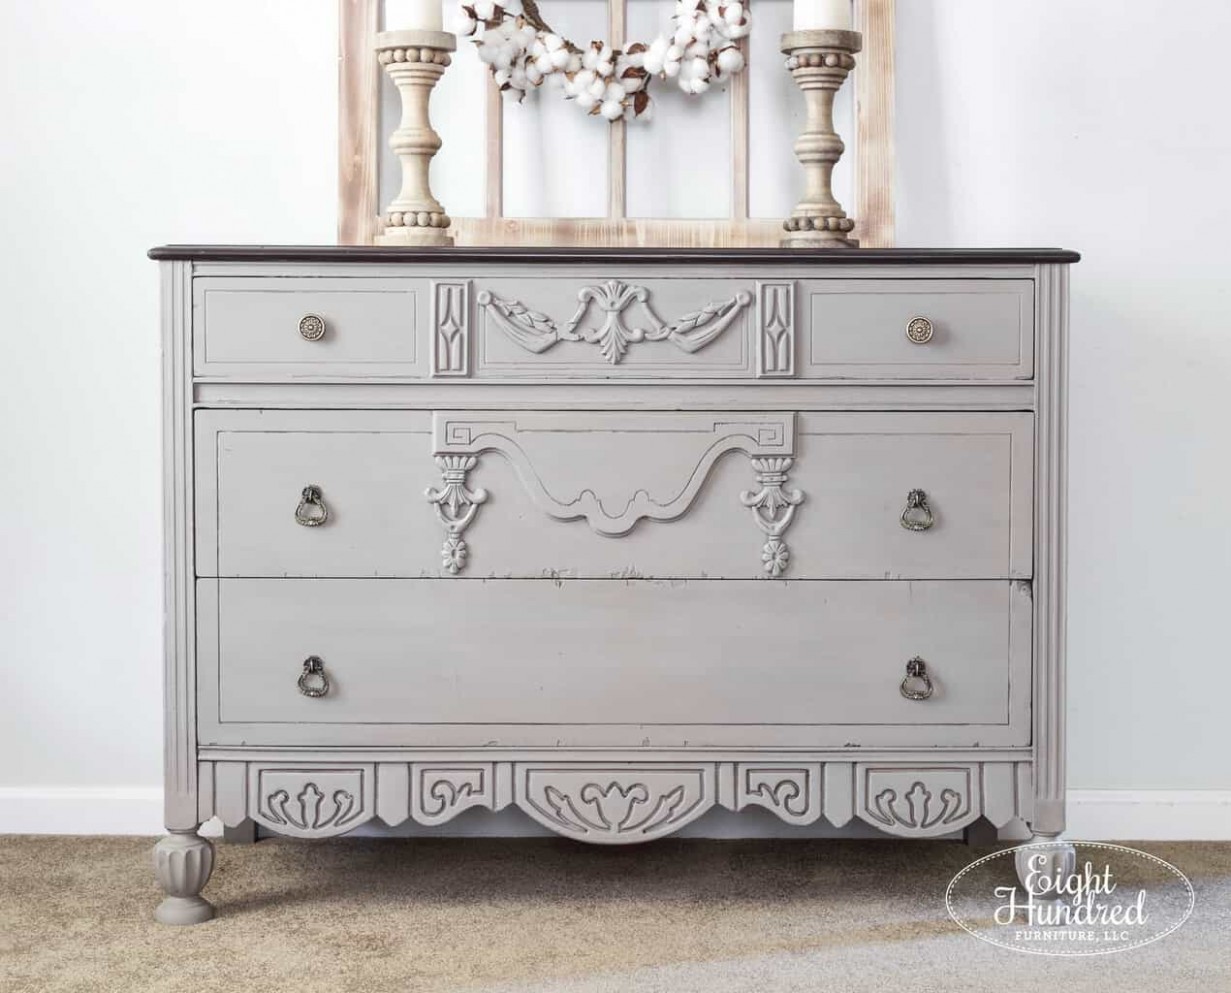 Repainting A Dresser In Chalk Paint® Eight Hundred Furniture Preparation For Annie Sloan Chalk Paint